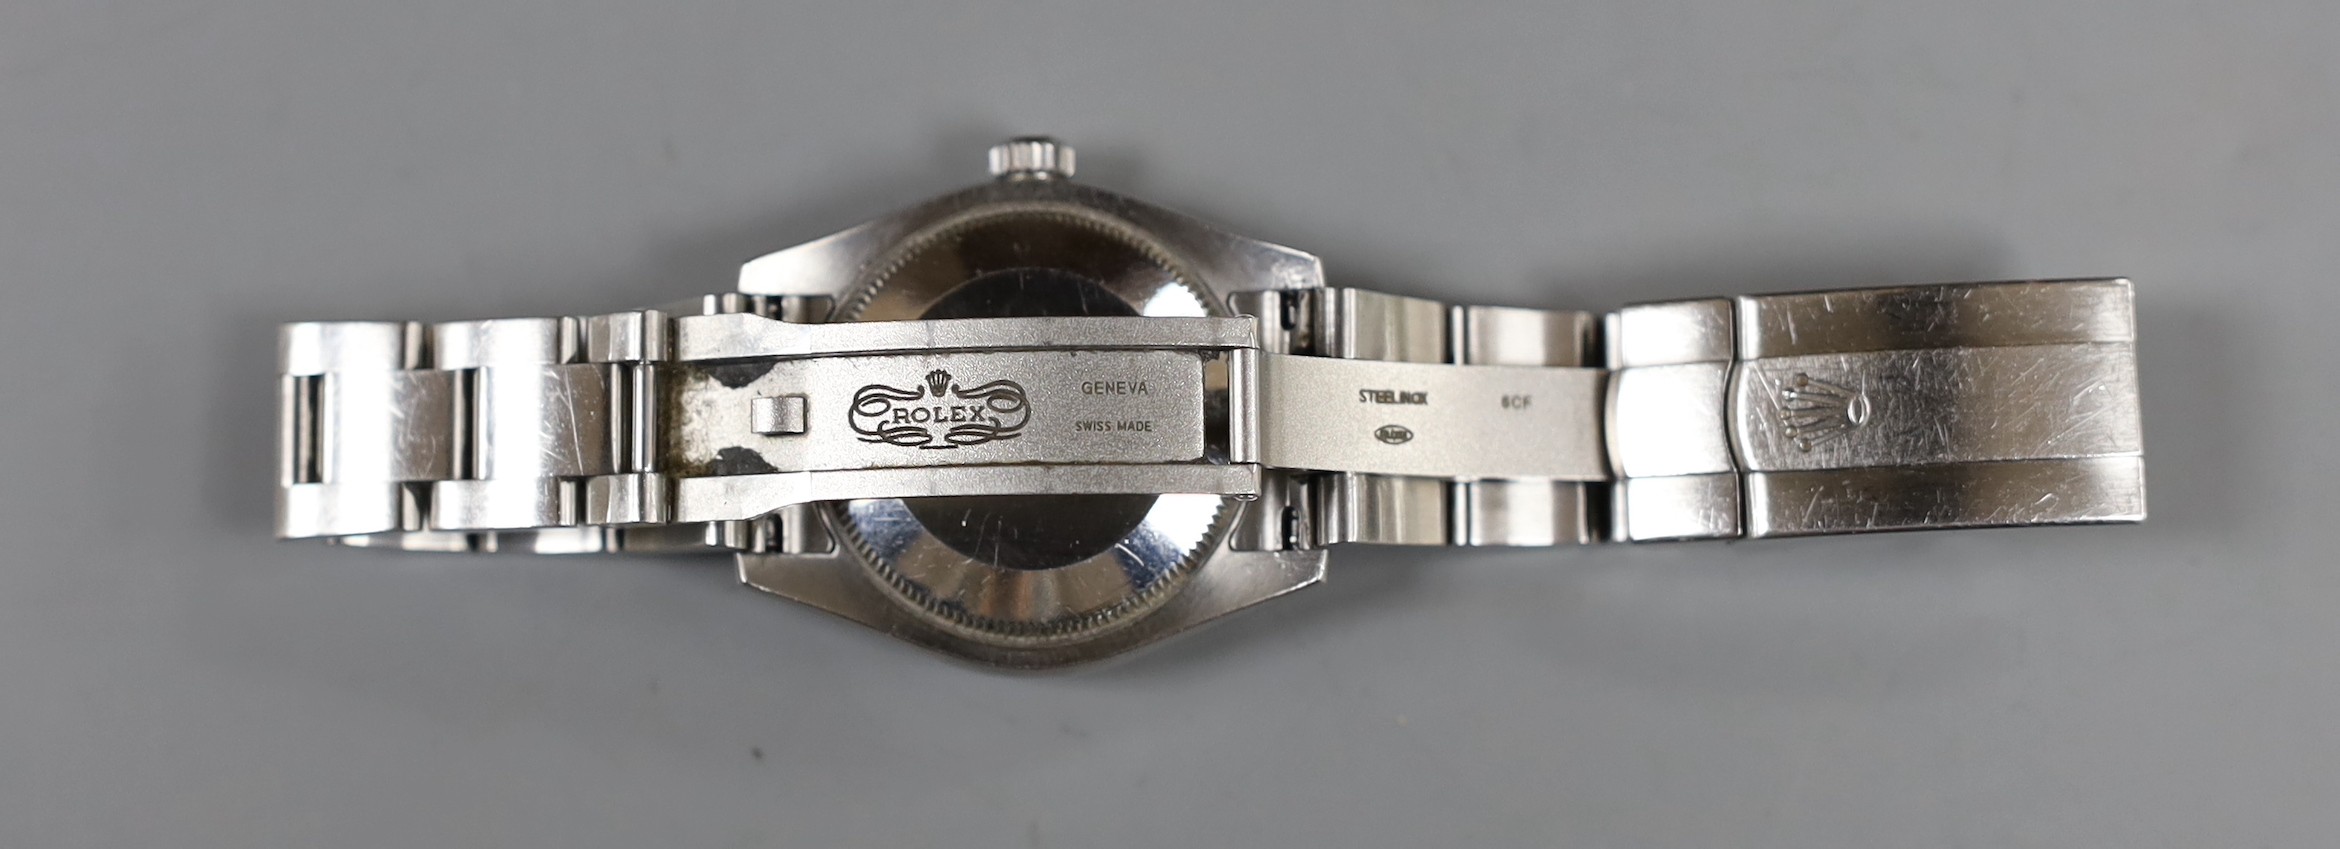 A lady's 2011 stainless steel Rolex Oyster Perpetual wrist watch, on a stainless steel Rolex bracelet, case diameter 31mm, with box and certificate, model no. 177200, serial no. V958067.